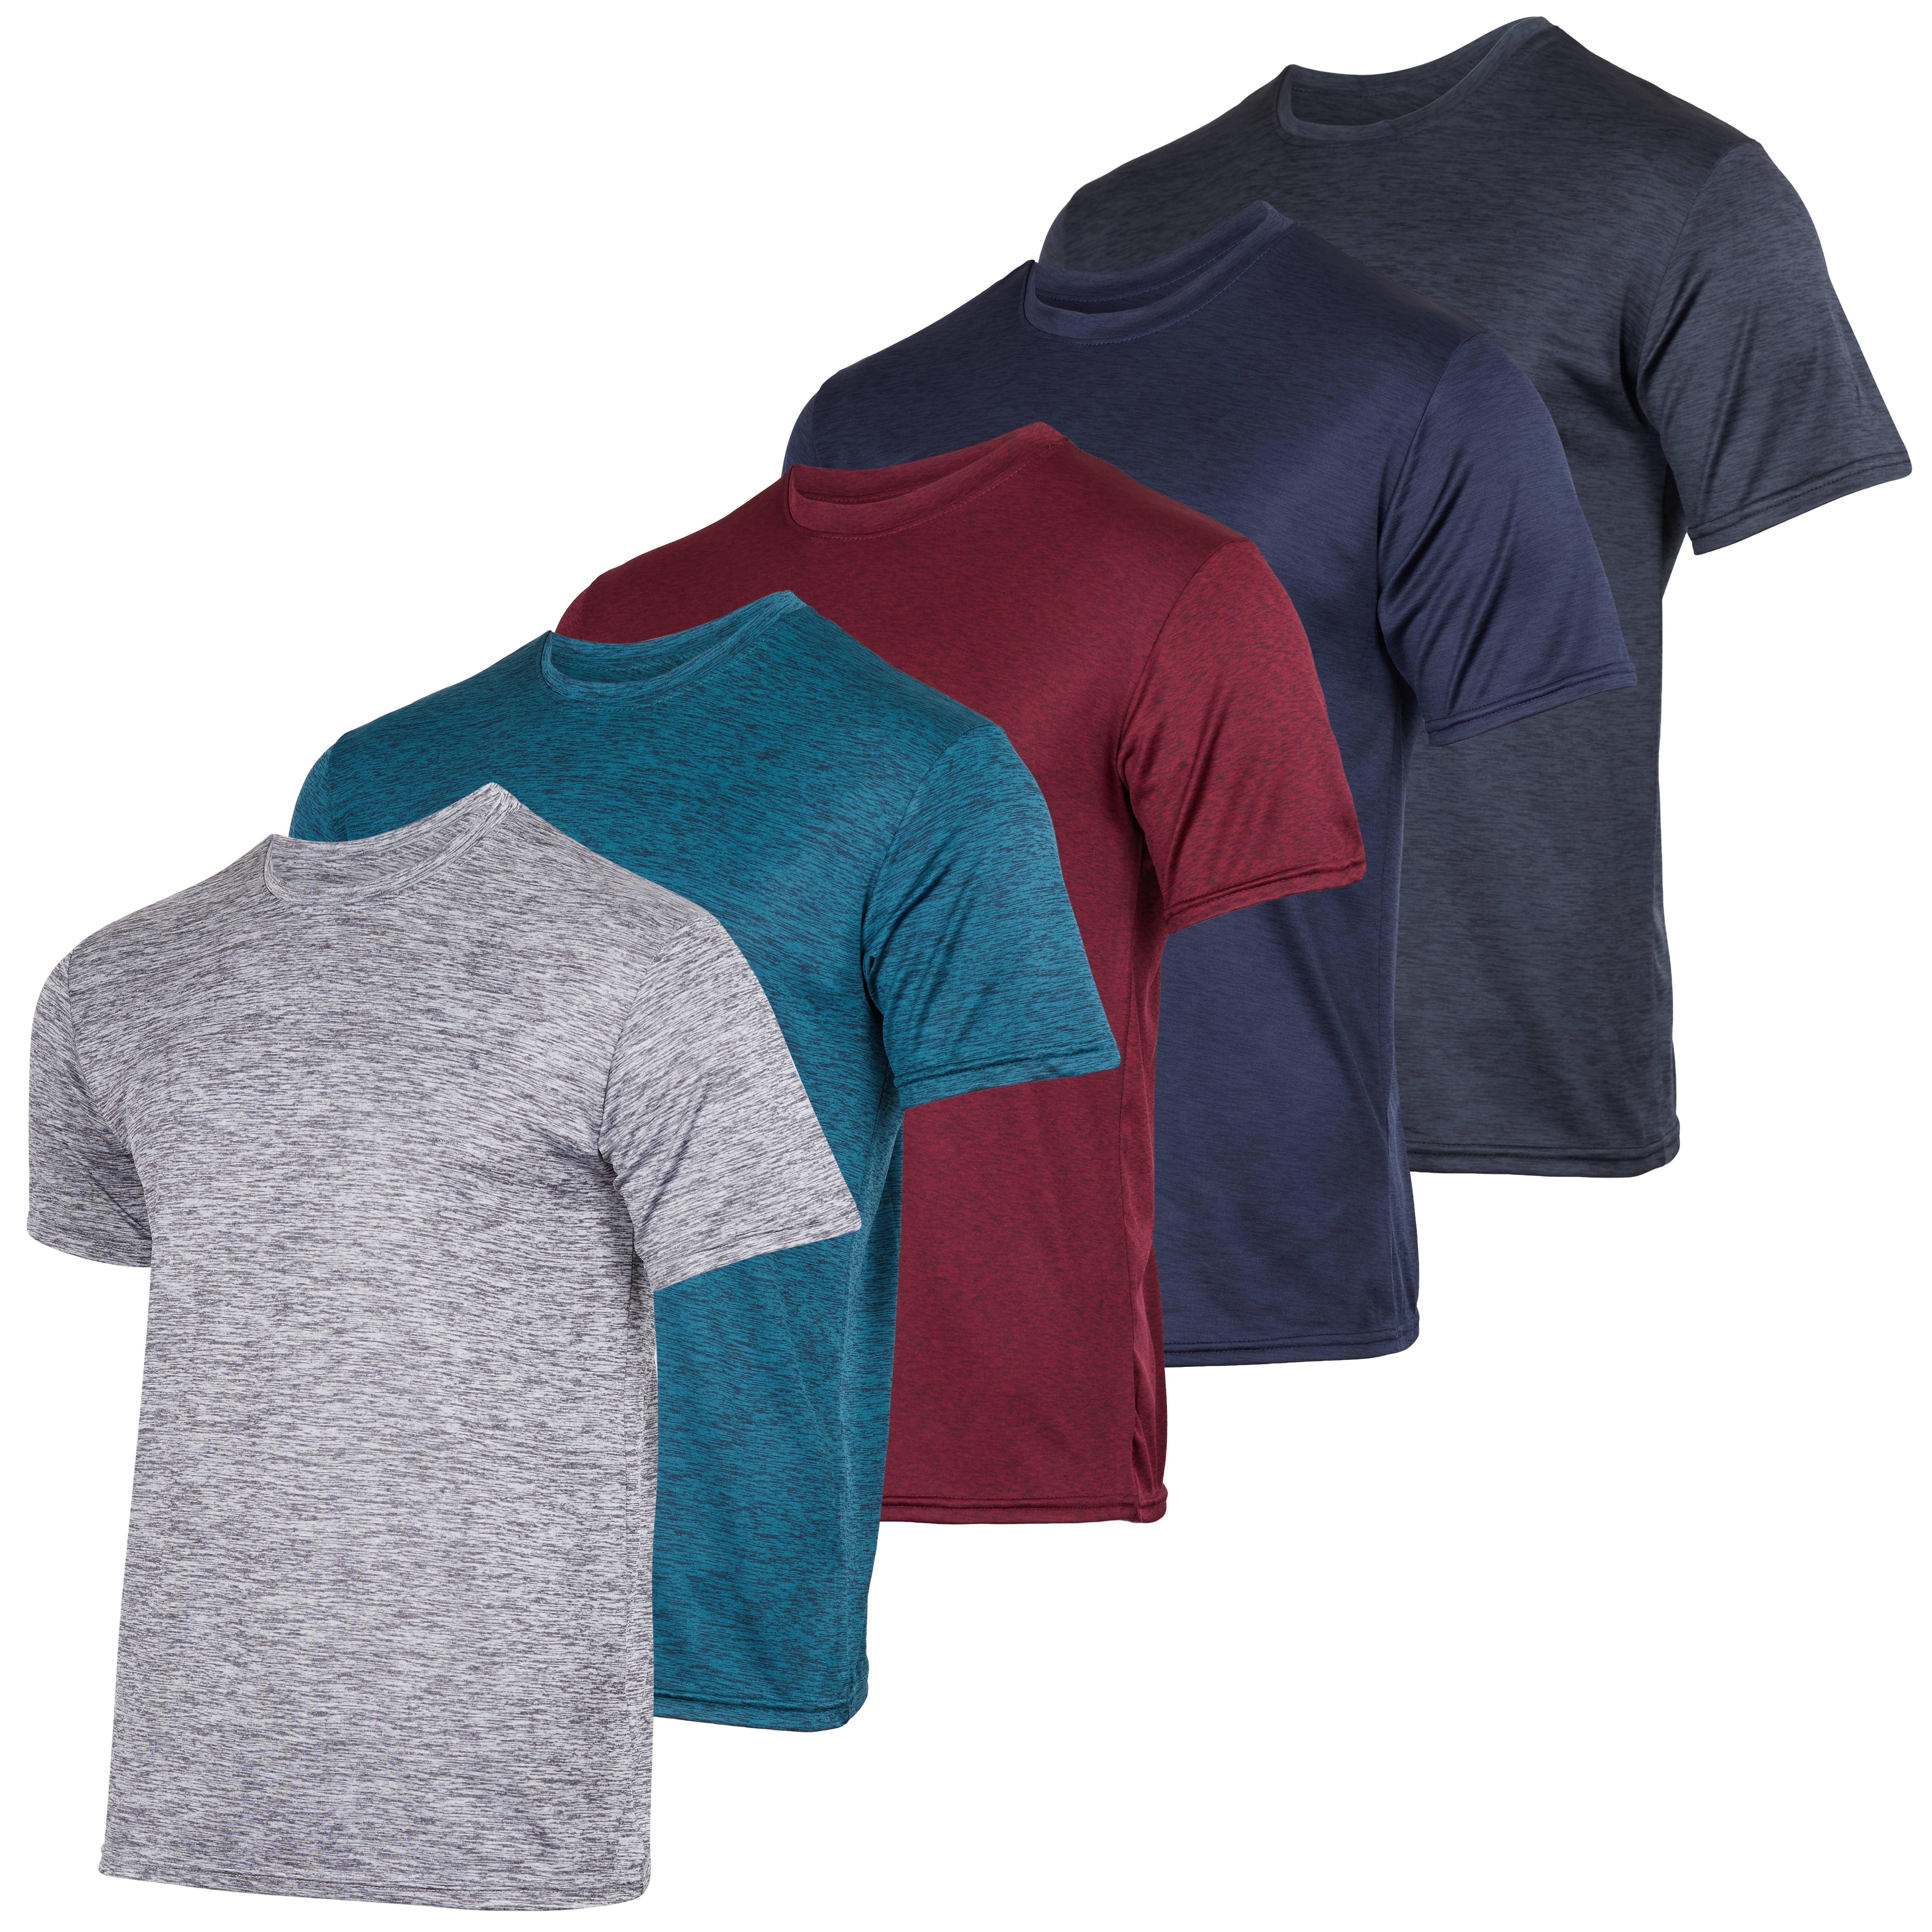 Real Essentials 5 Pack: Men's Dry-Fit Moisture Wicking Active Athletic  Performance Crew T-Shirt 